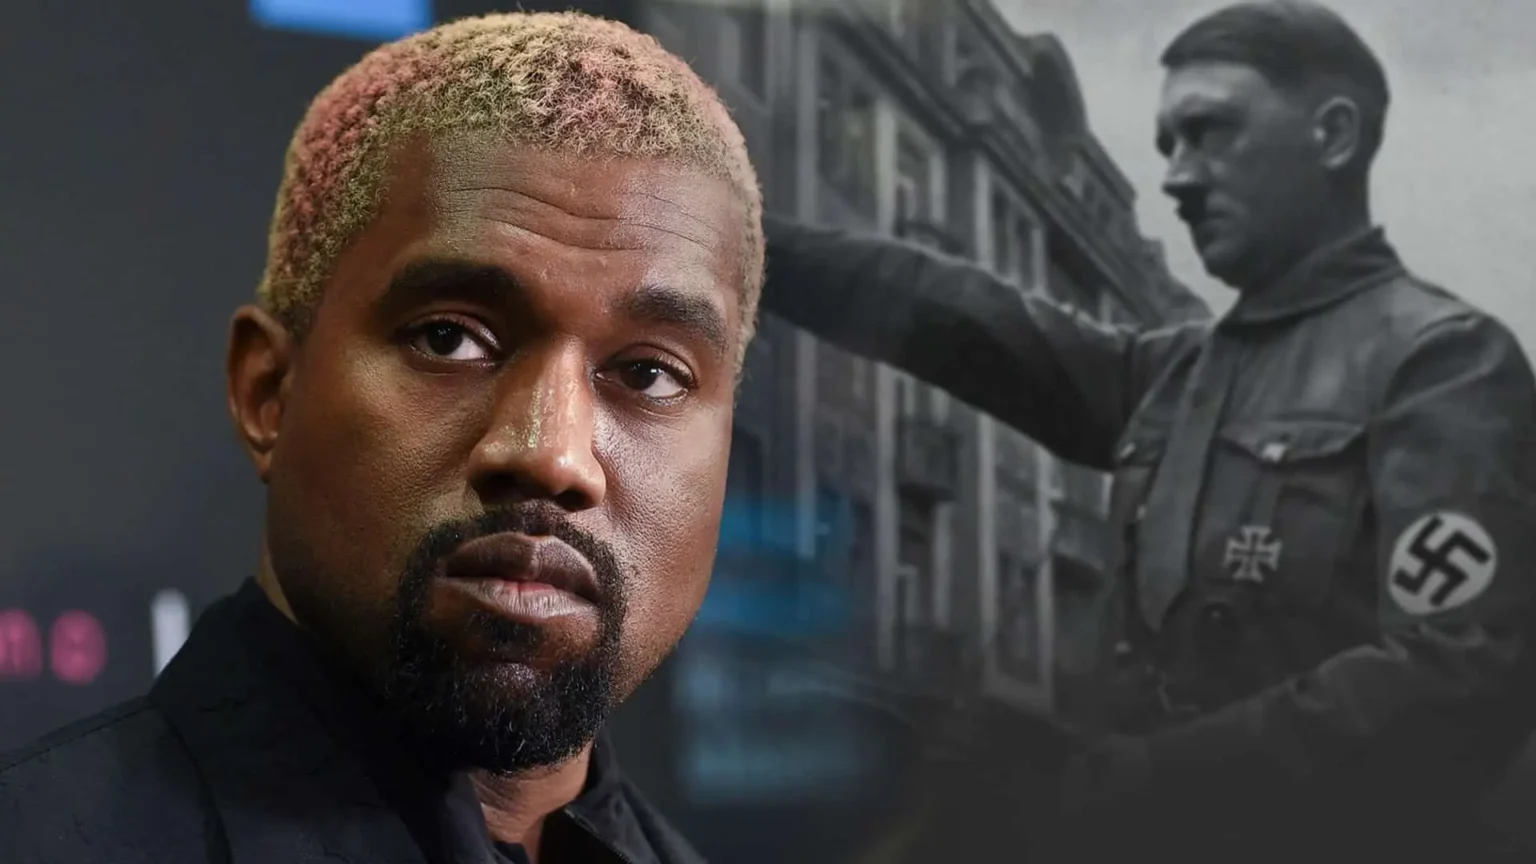 kanye-west-accused-of-calling-adolf-hitler-as-an-innovator-in-a-new-lawsuit